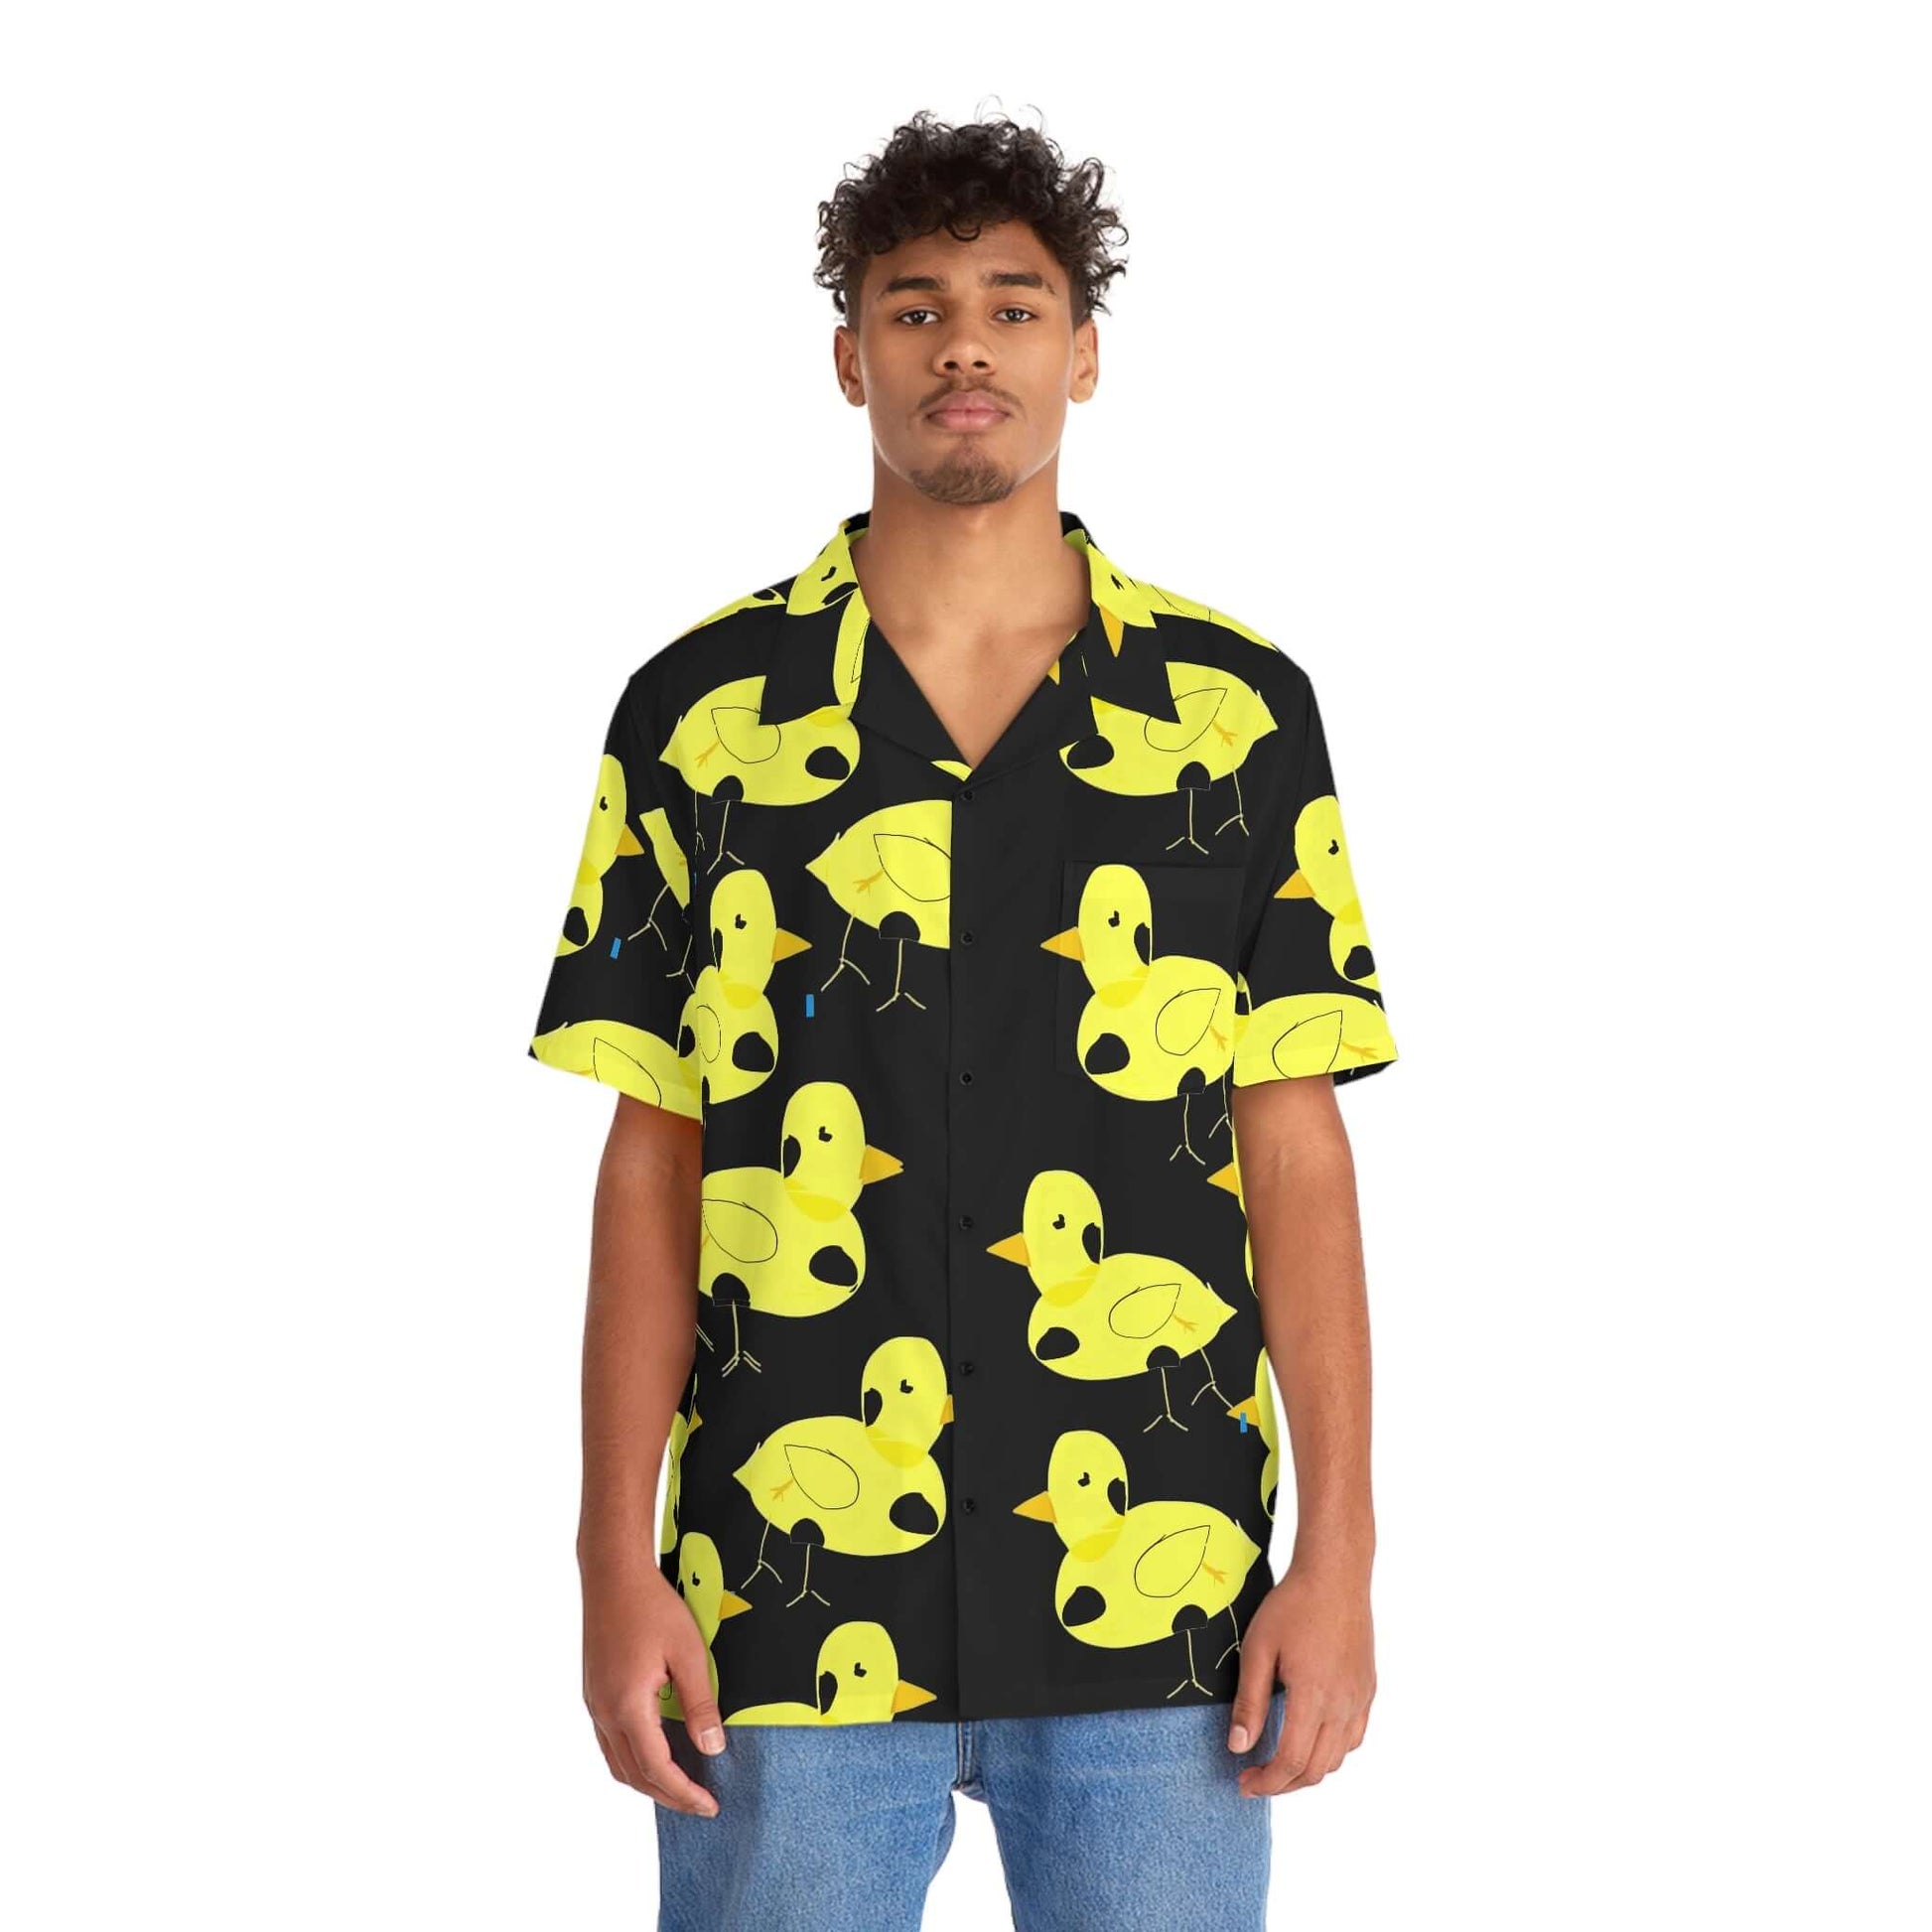 Black button up Hawaiian Shirt with bright yellow Four-Legged Chicken print by young disabled artist D.B.